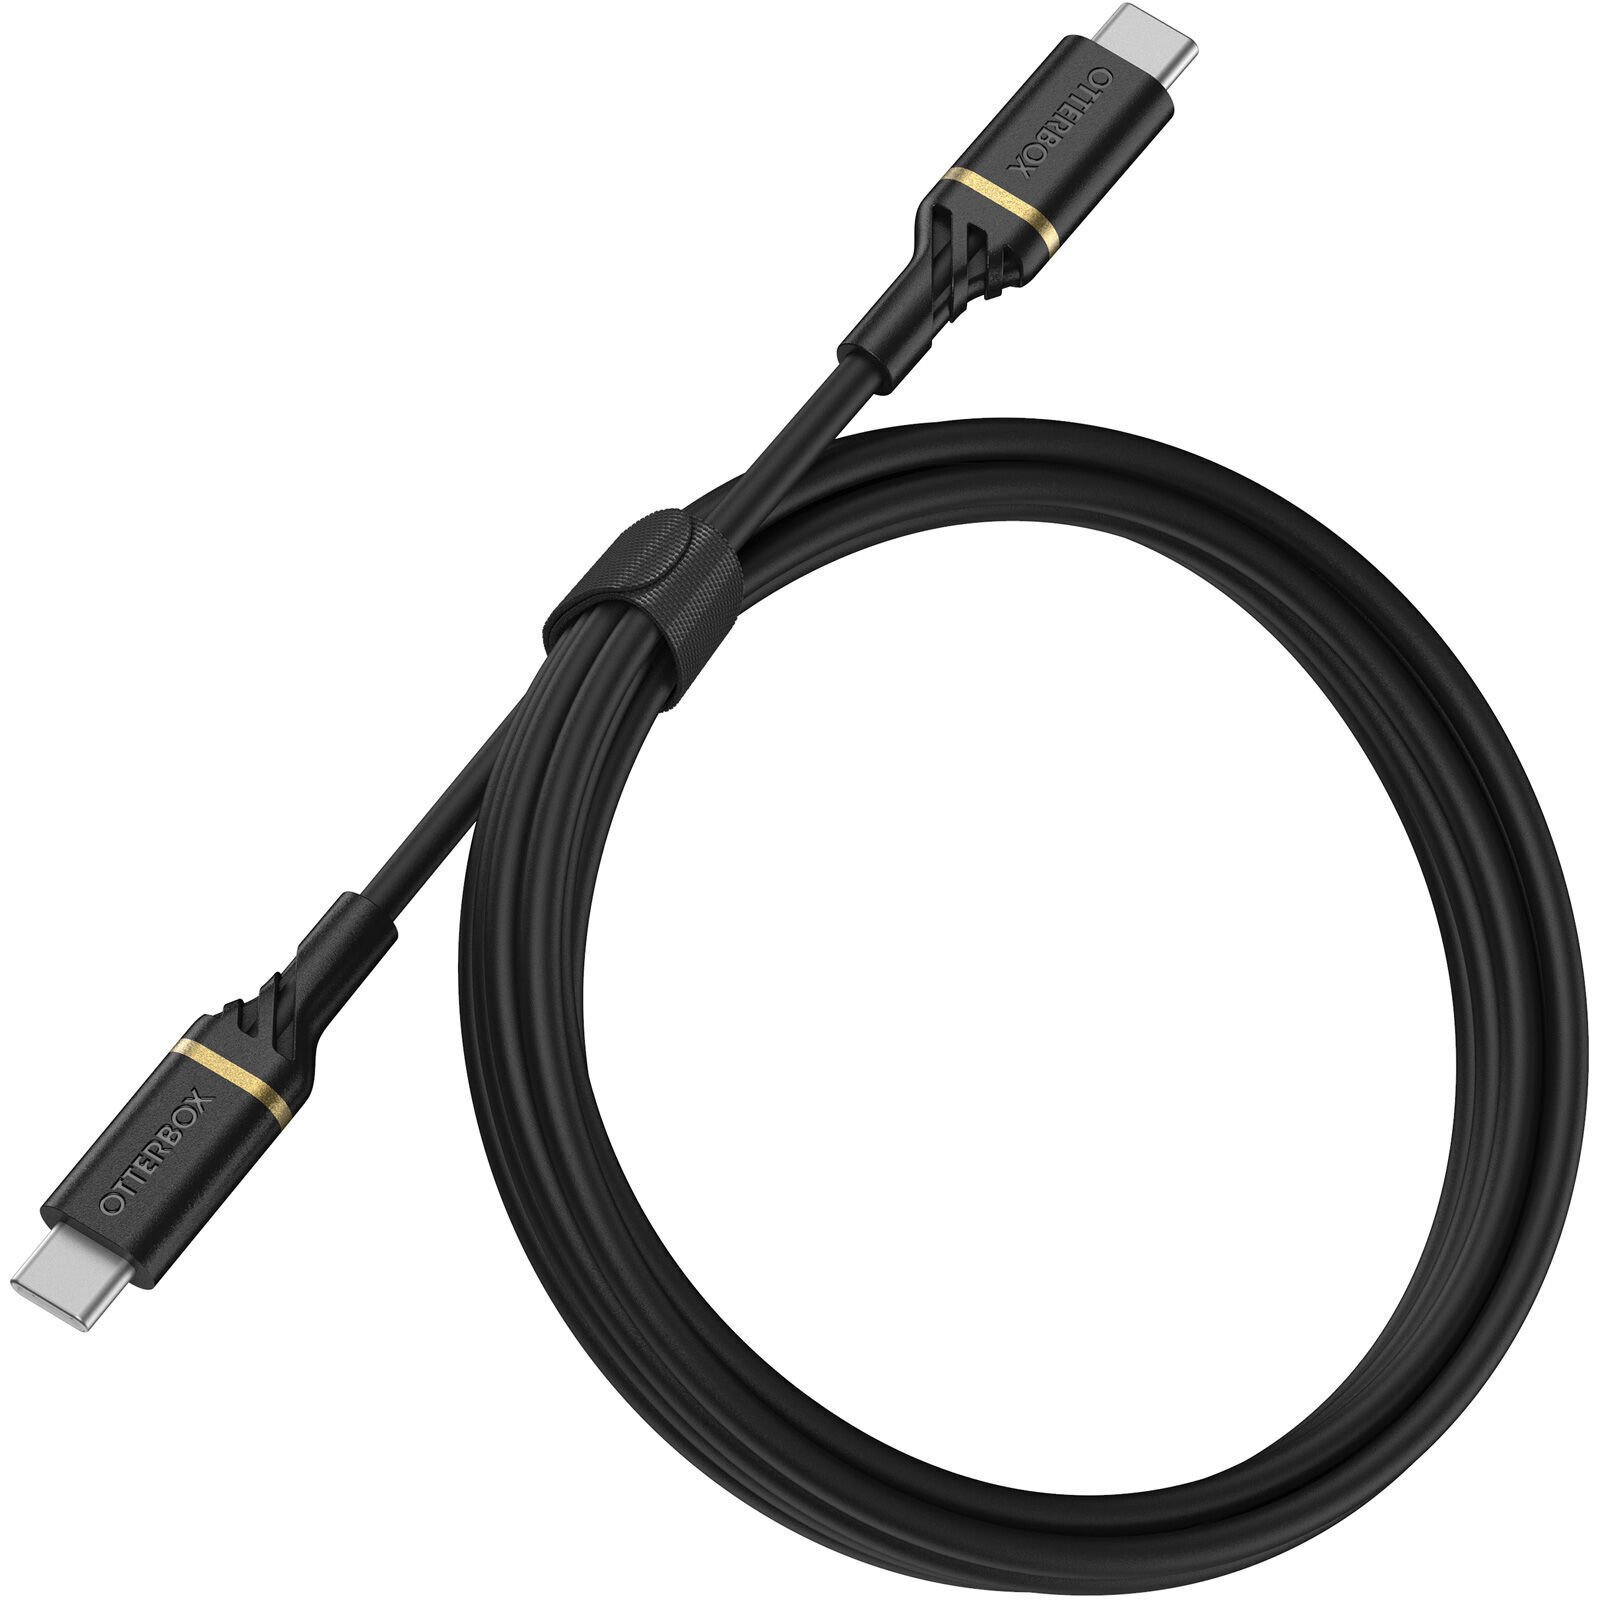 OtterBox USB-C to USB-C Fast Charge Cable (1M) - Black (78-52541), USB 2.0, 3 AMPS (60W) USB PD, Bend/Flex-Tested 3K Times, Durable & Flexible